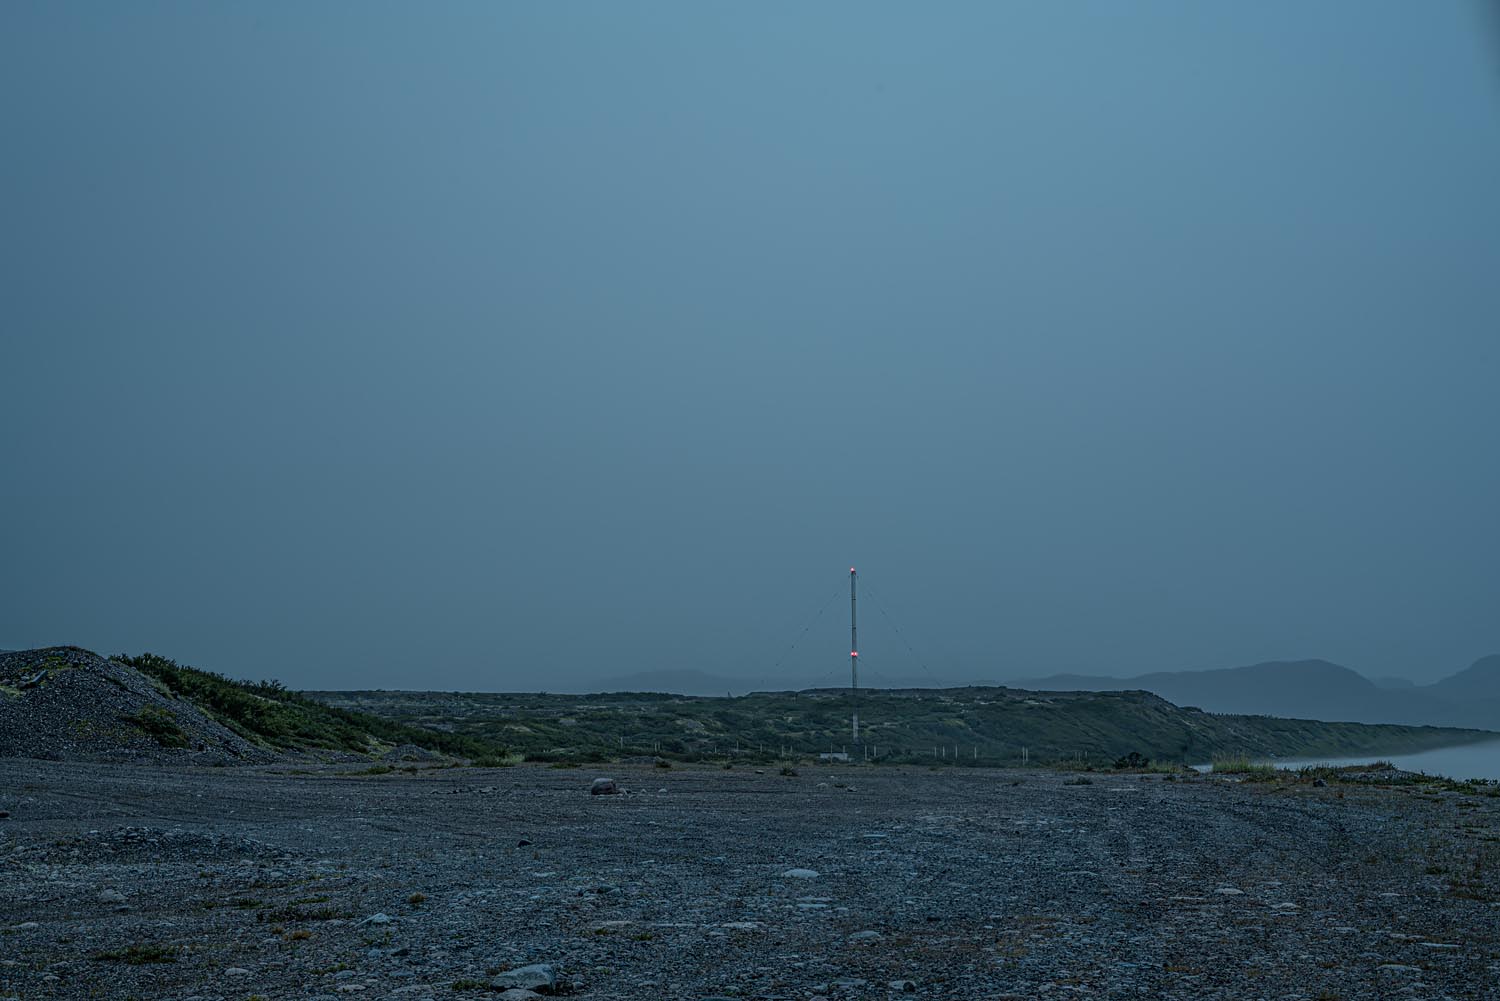 Shadow and Light: New Night Landscape Photographs of Greenland By Steve Giovinco. Radio Tower in Distance